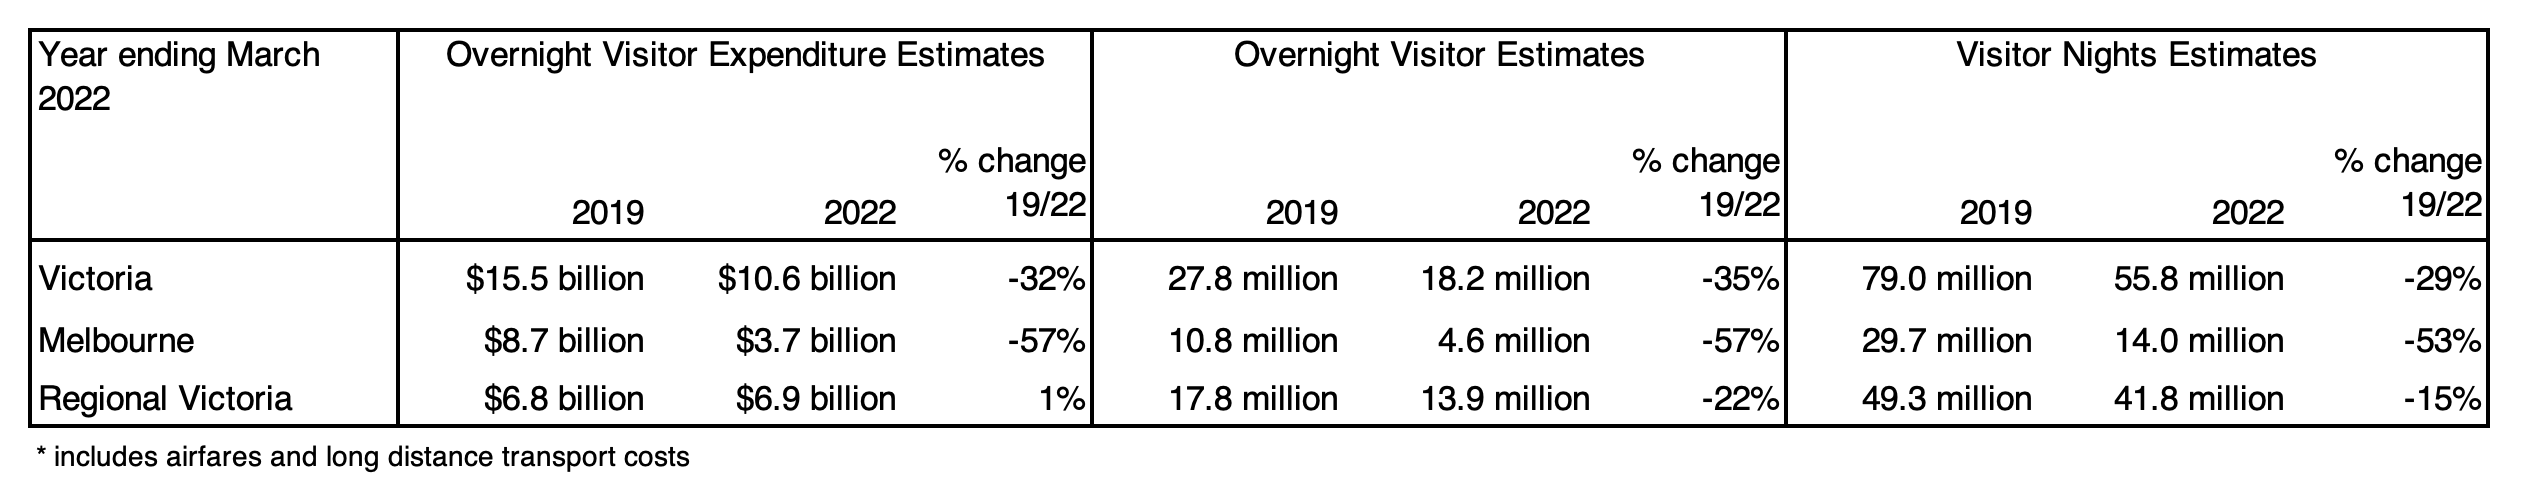 "Table Title - Victorian Domestic Overnight Visitor Summary Table, Year ending March 2022. Column one title is Visitor Expenditure Estimates (includes airfares and long-distance transport costs). Victoria: $15.5 billion in year ending March 2019, $10.6 billion in year ending March 2022, down 32 per cent. Melbourne: $8.7 billion in year ending March 2019, $3.7 billion in year ending March 2022, down 57 per cent. Regional Victoria: $6.8 billion in year ending March 2019, 6.9 billion in year ending March 2022, up 1 per cent. Column two title is Overnight Visitor Estimates. Victoria: 27.8 million in year ending March 2019, 18.2 million in year ending March 2022, down 35 per cent. Melbourne: 10.8 million in year ending March 2019, 4.6 million in year ending March 2022, down 57 per cent. Regional Victoria: 17.8 million in year ending March 2019, 13.9 million in year ending March 2022, down 22 per cent. Column three title is Visitor Nights Estimates. Victoria: 79.0 million in year ending March 2019, 55.8 million in year ending March 2022, down 29 per cent. Melbourne: 29.7 million in year ending March 2019, 14.0 million in year ending March 2022, down 53 per cent. Regional Victoria: 49.3 million in year ending March 2019, 41.8 million in year ending March 2022, down 15 per cent." 